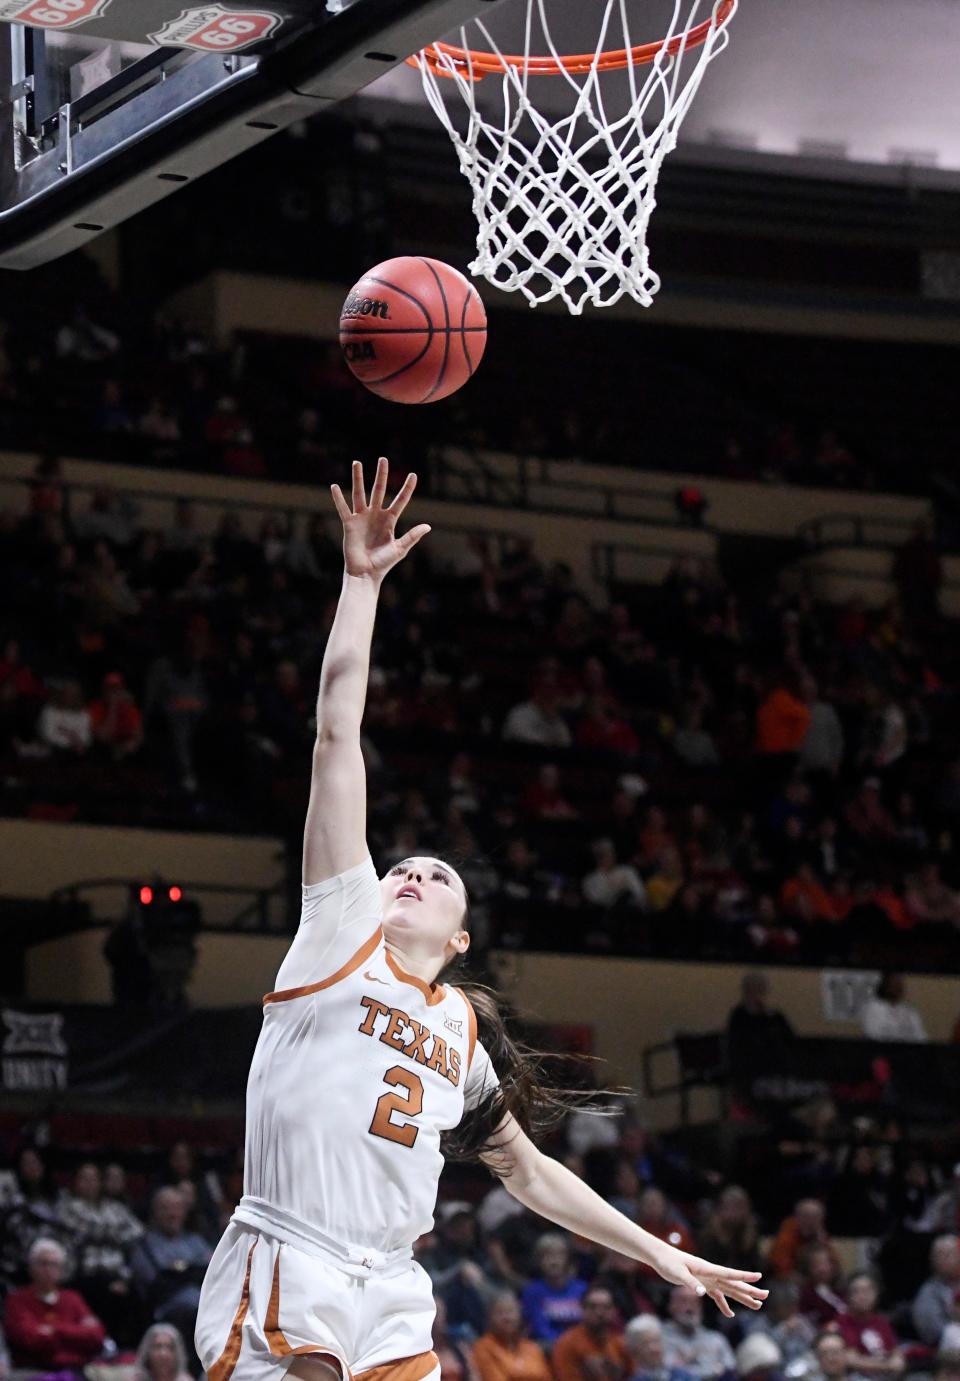 Texas guard Shaylee Gonzales puts up a shot during Saturday's win. She finished with 17 points, including a game-changing 3-pointer late in the first half.